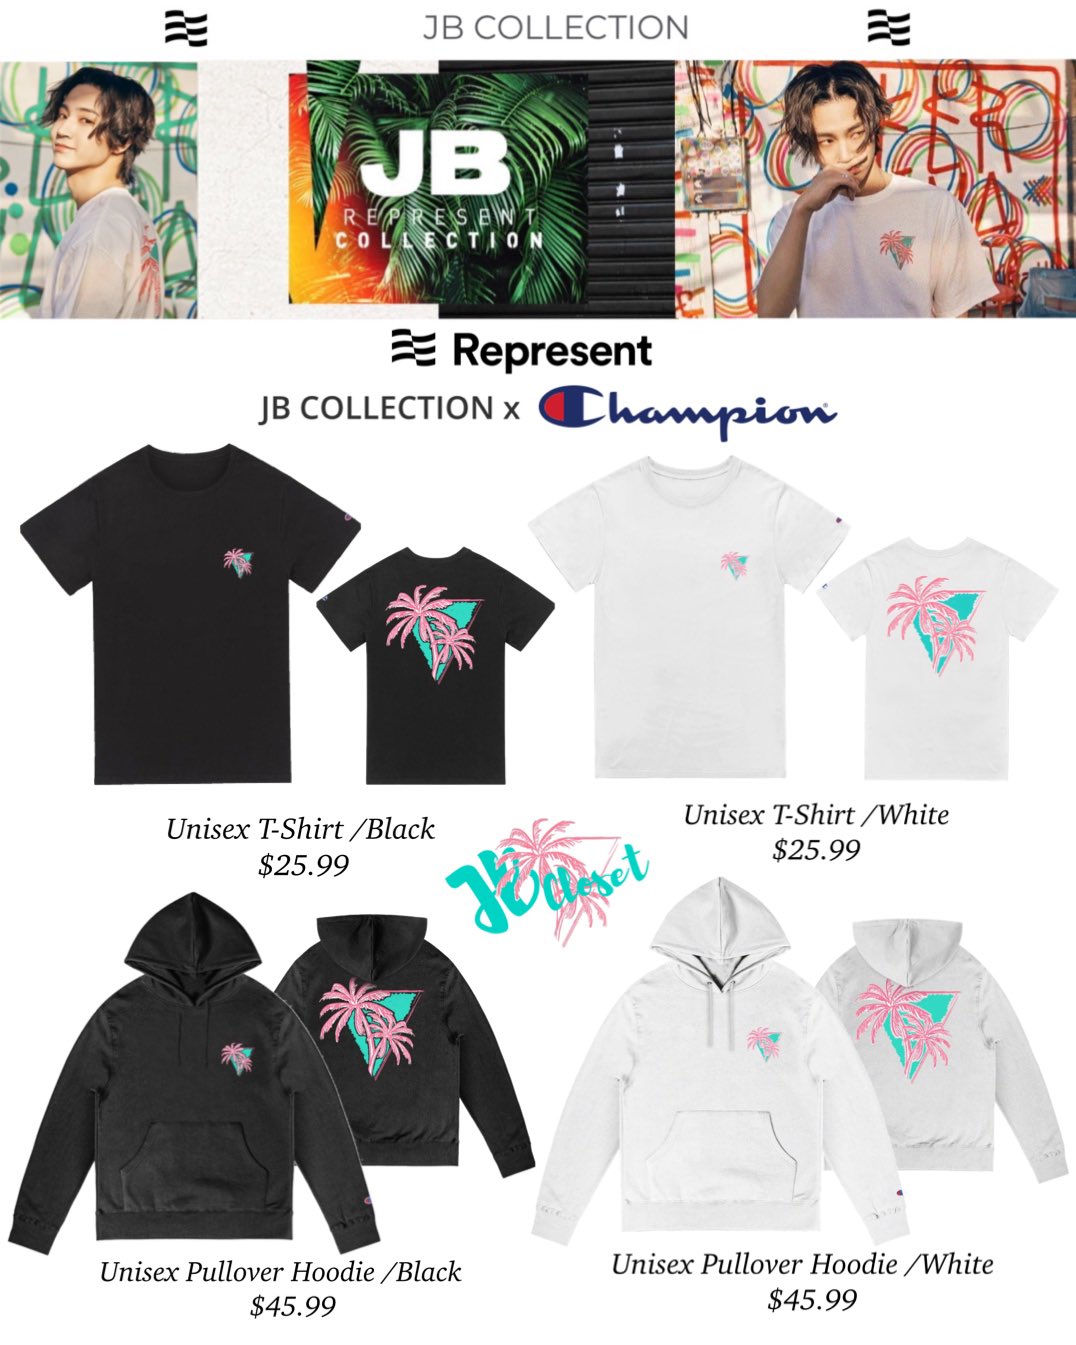 JAY B's Closet on X: REPRESENT X JB COLLECTION Even with colder, winter  months ahead, the summer-inspired collection reflects JB's mindset and love  for finding PARADISE wherever you may be. #GOT7 #갓세븐 #